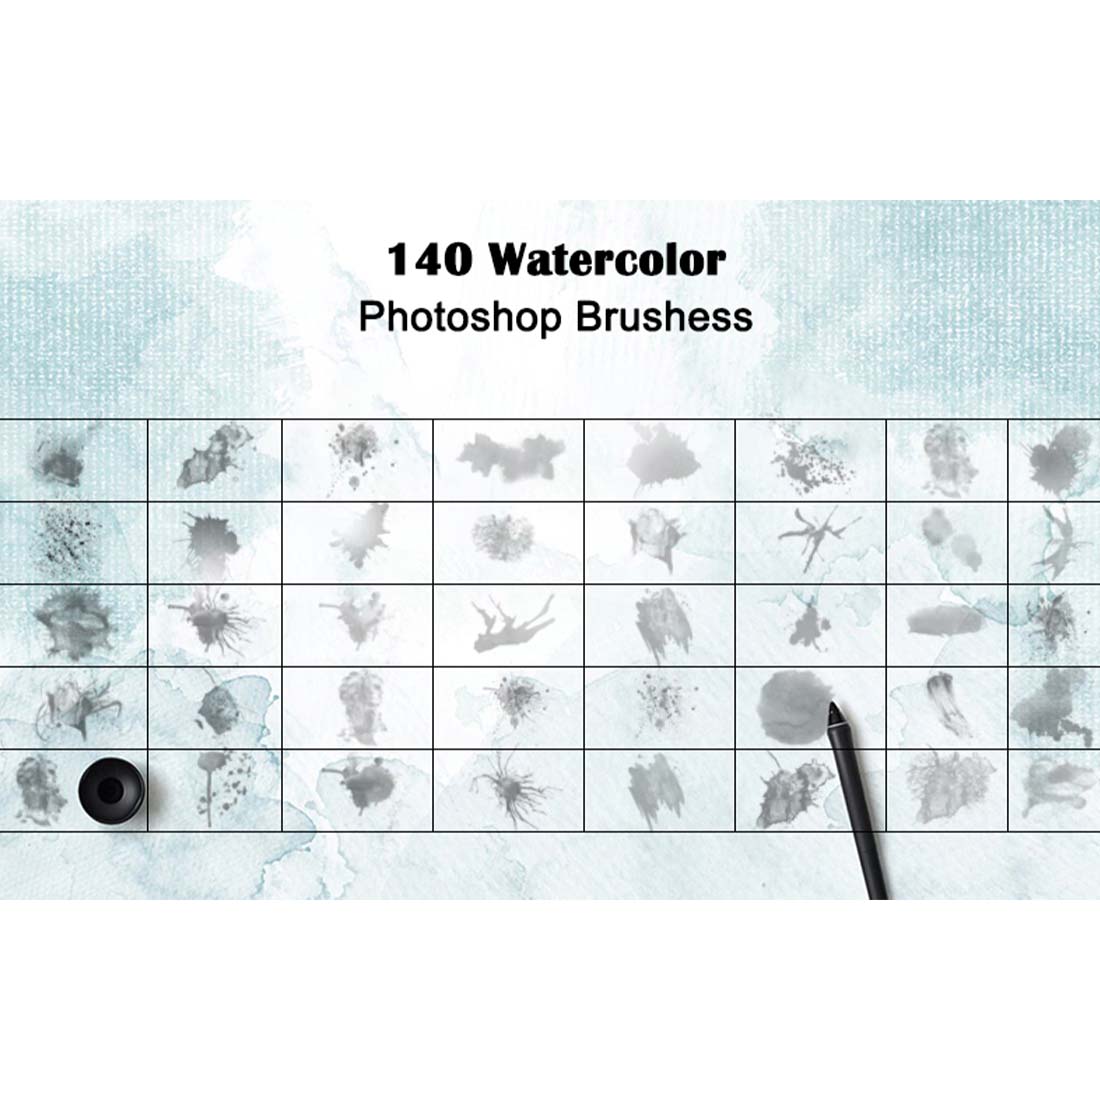 Water Color 140 Photoshop Brush cover image.